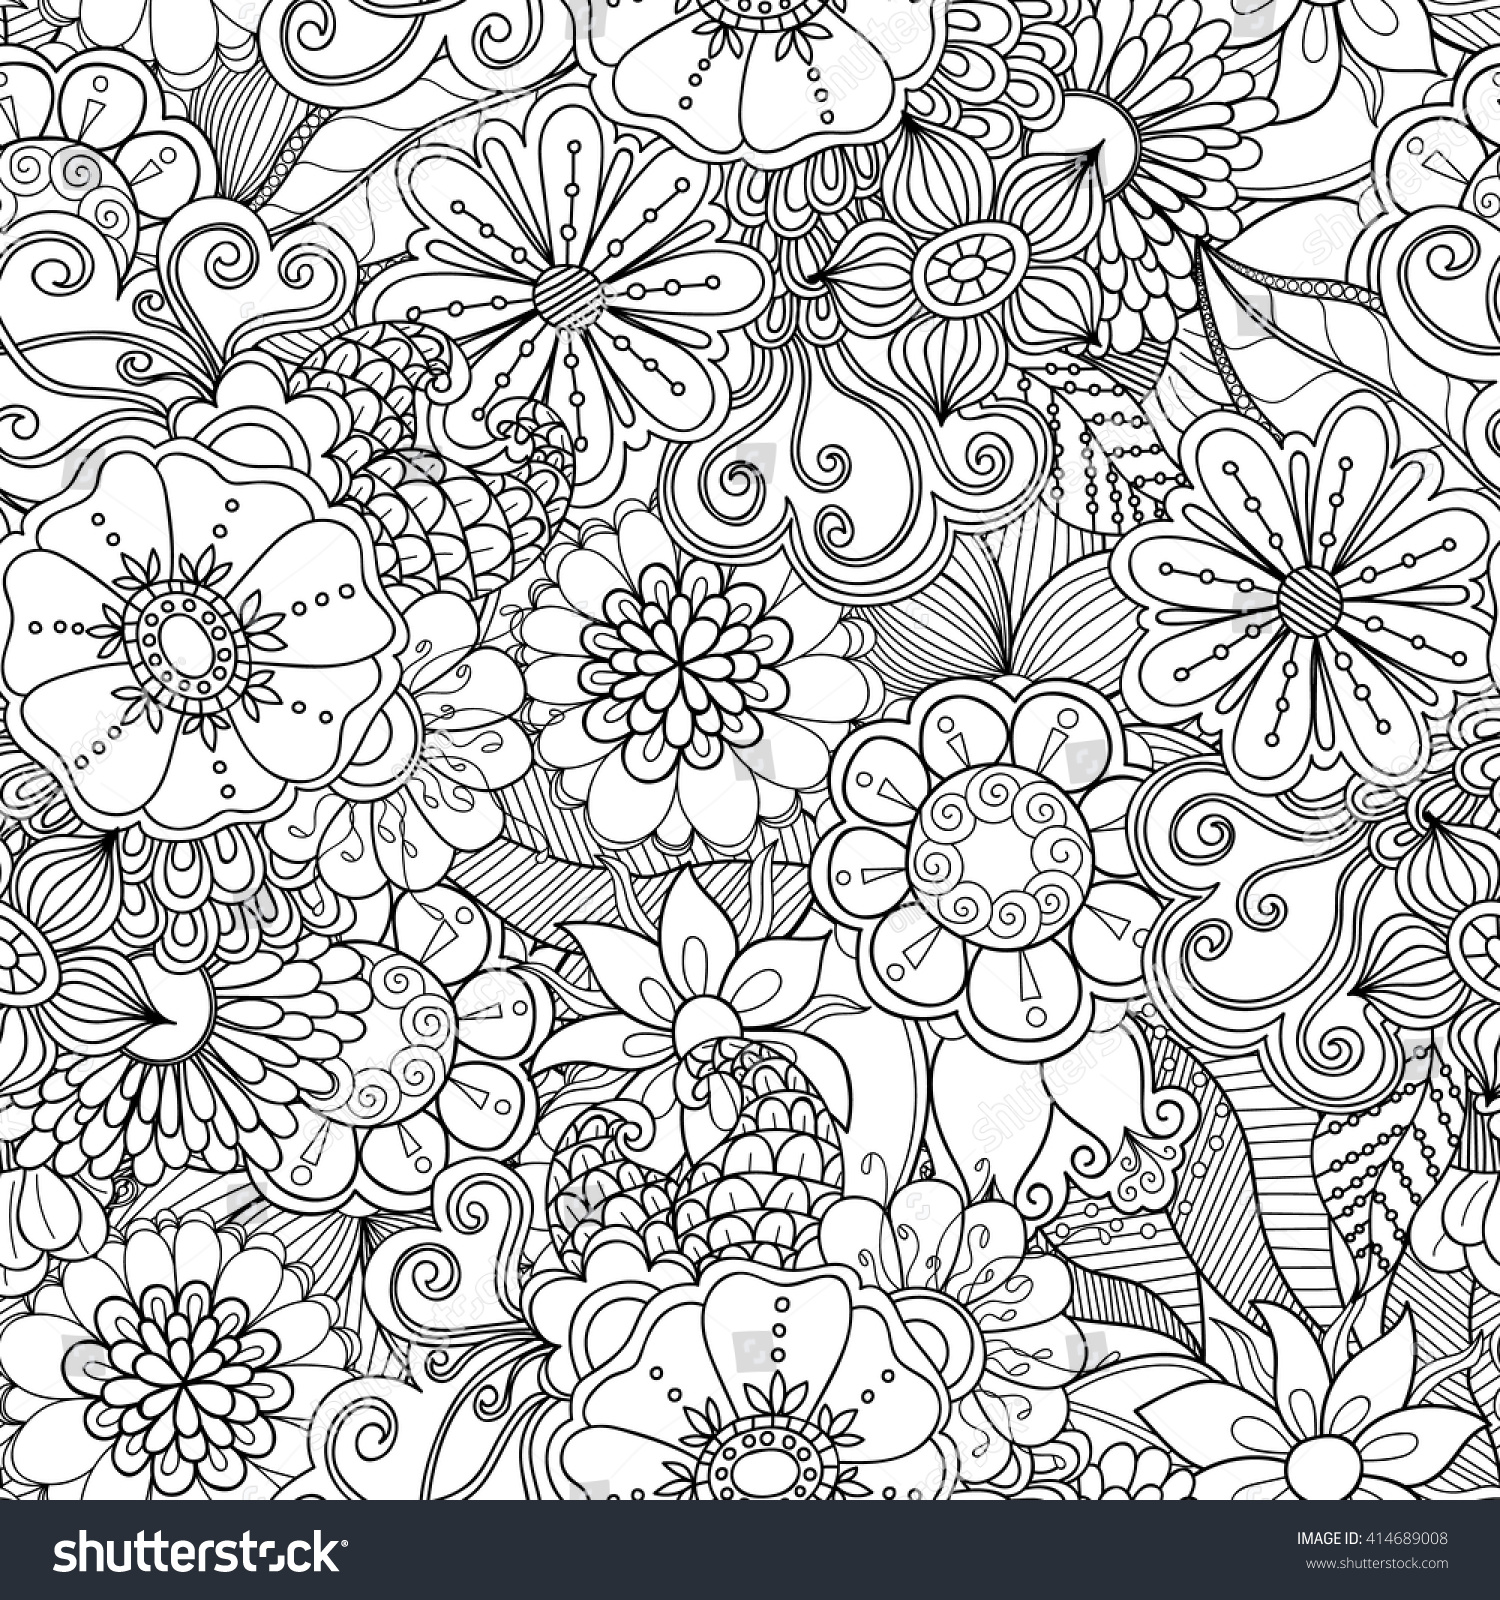 Doodle Flowers Seamless Pattern Zentangle Style Stock Vector (Royalty ...